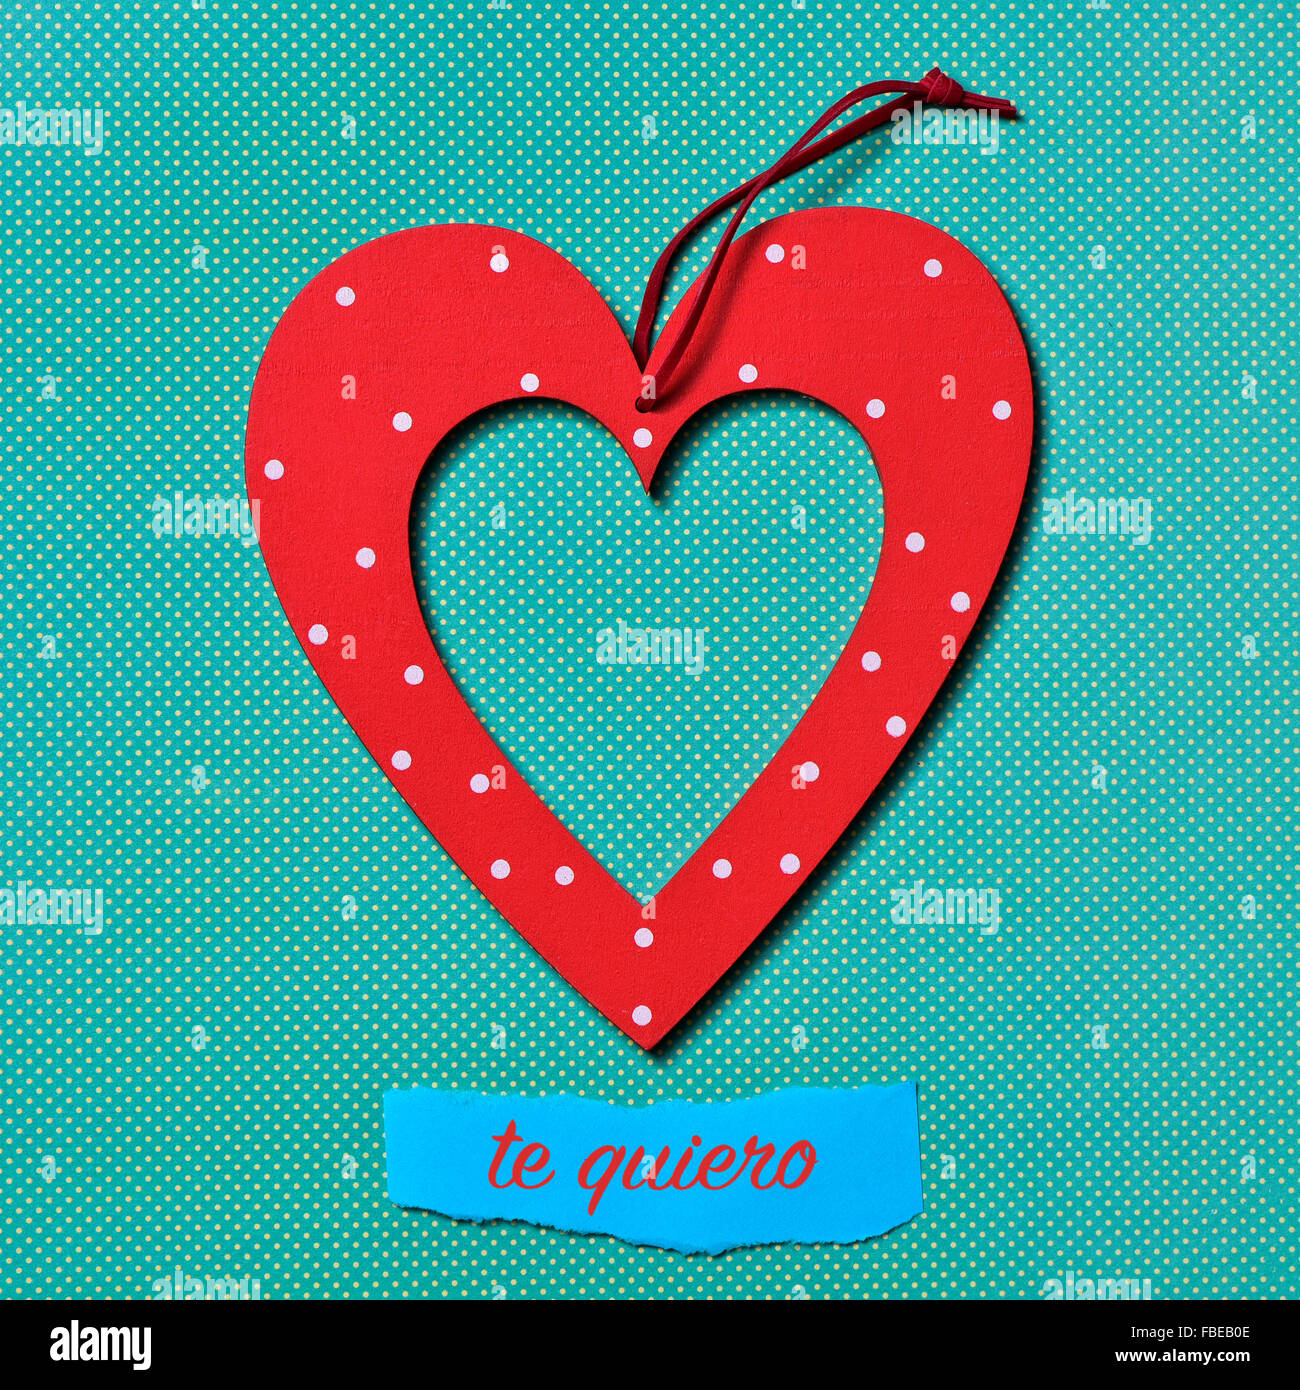 a heart-shaped ornament and the text te quiero, I love you in Spanish, on a colorful blue dot-patterned background Stock Photo